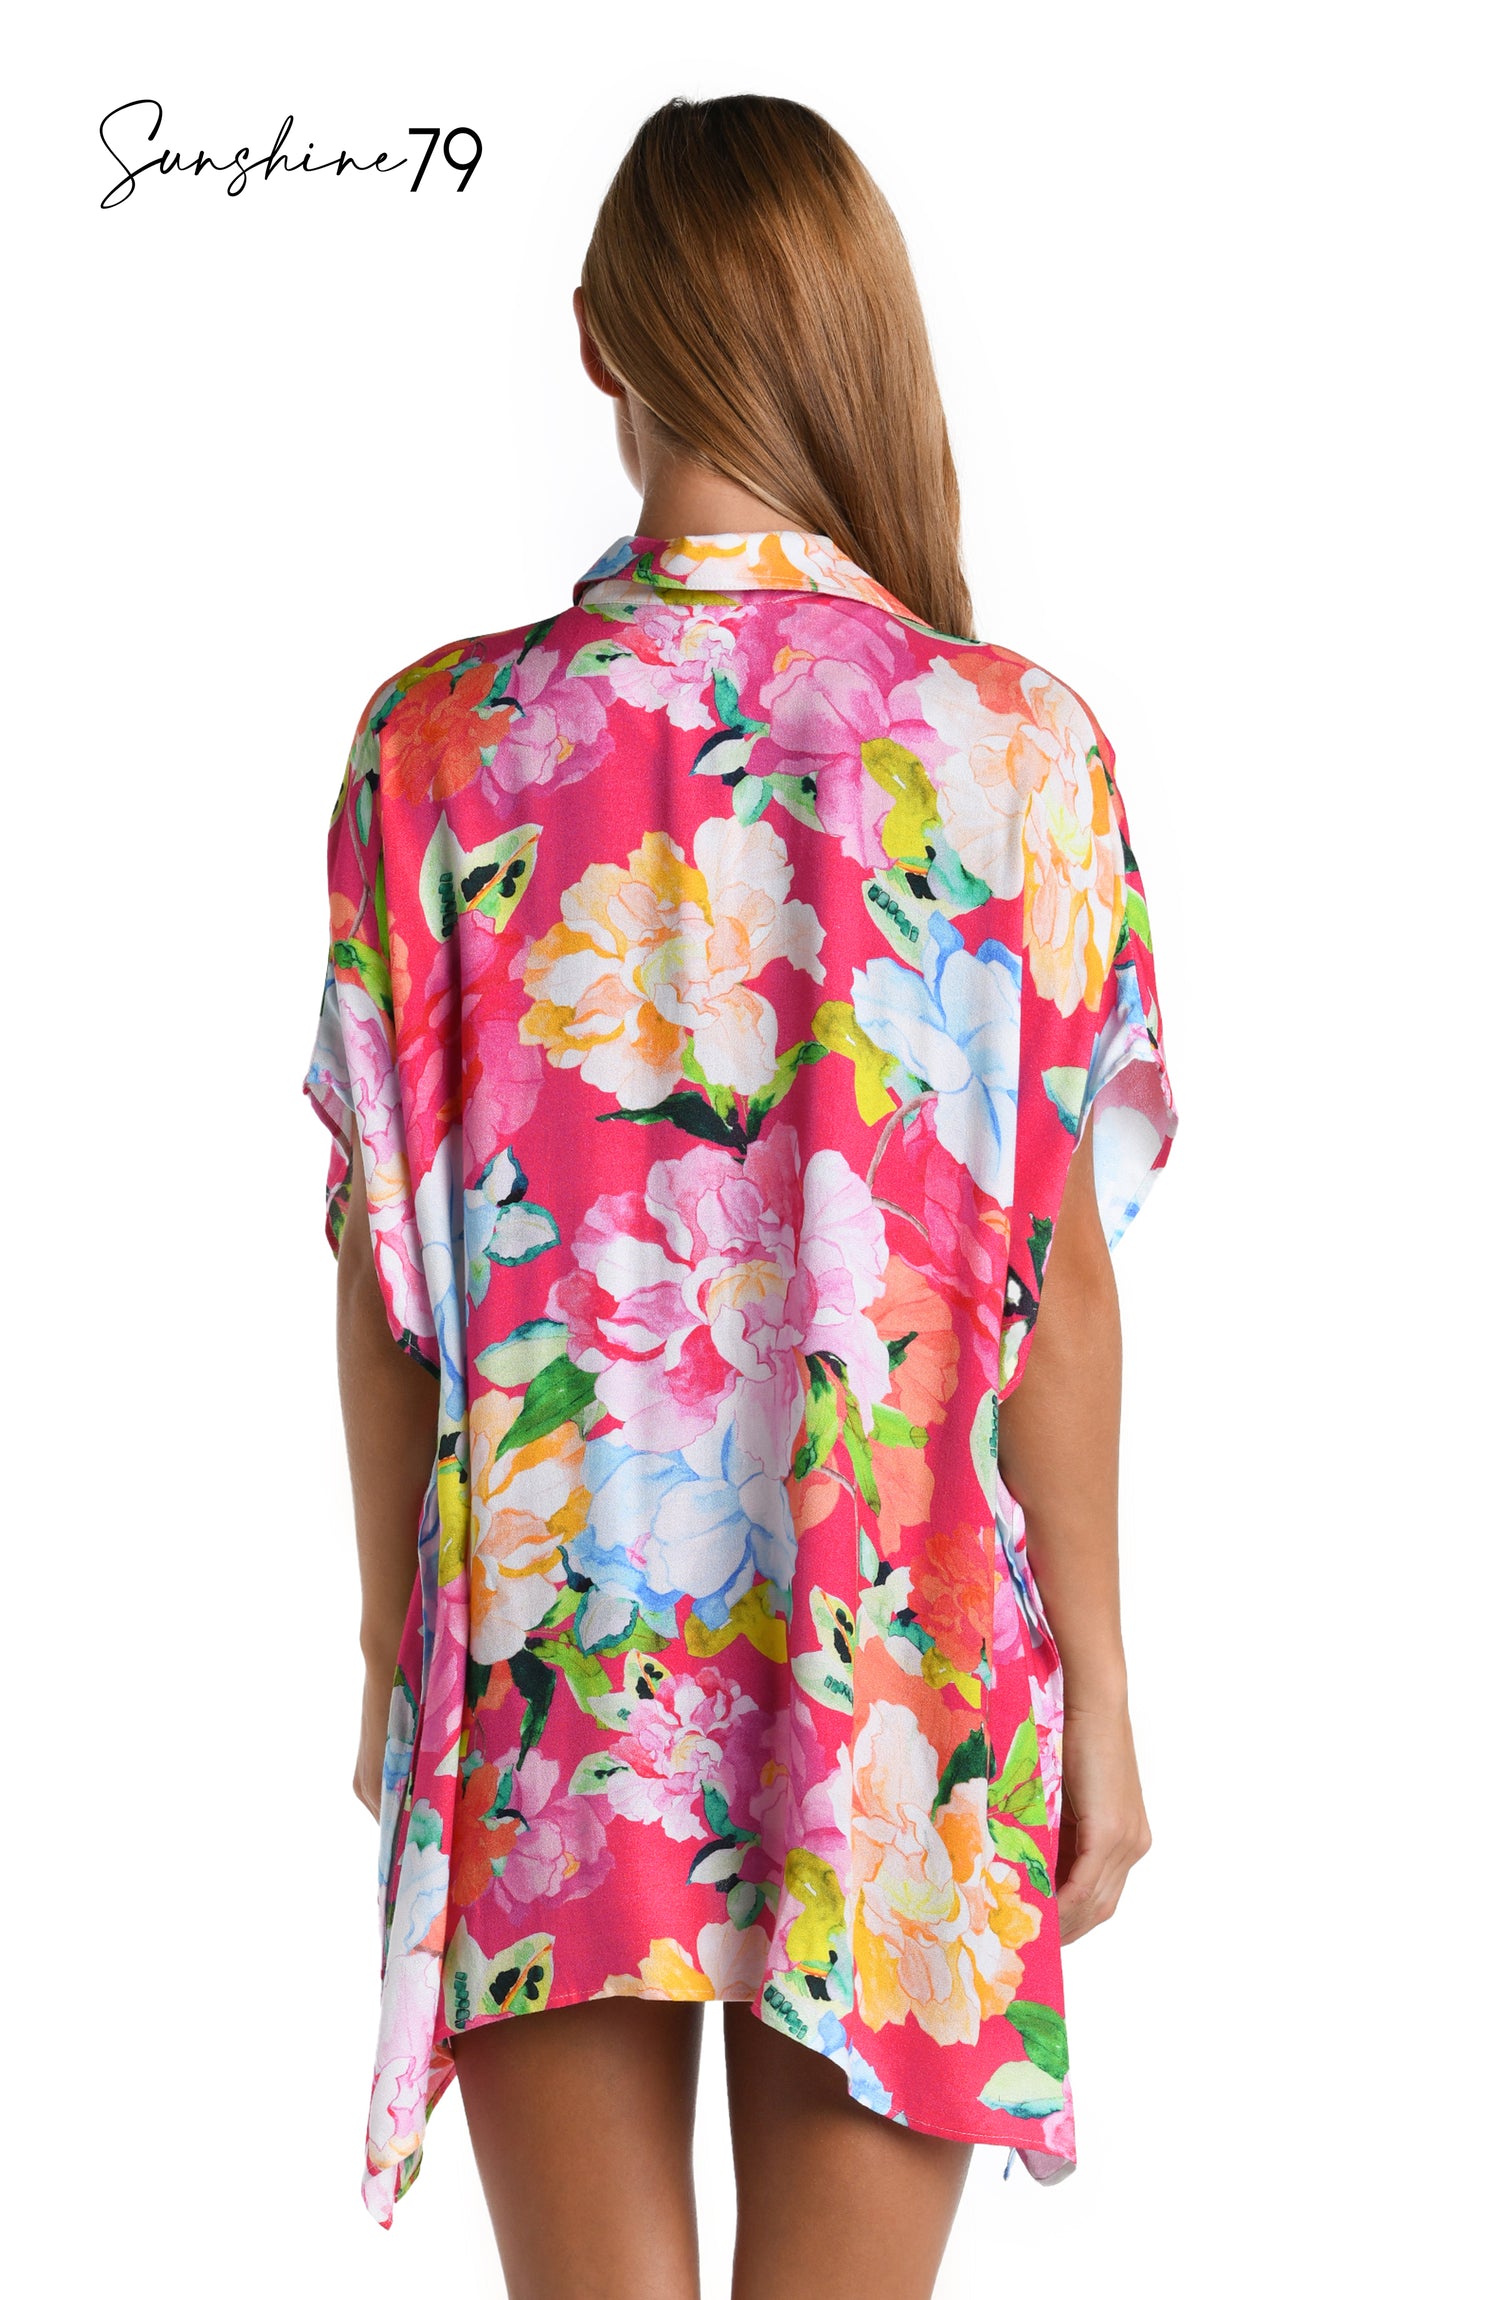 Model is wearing a colorful floral resort shirt cover up from the Sunshine 79 Expressive Garden Collection